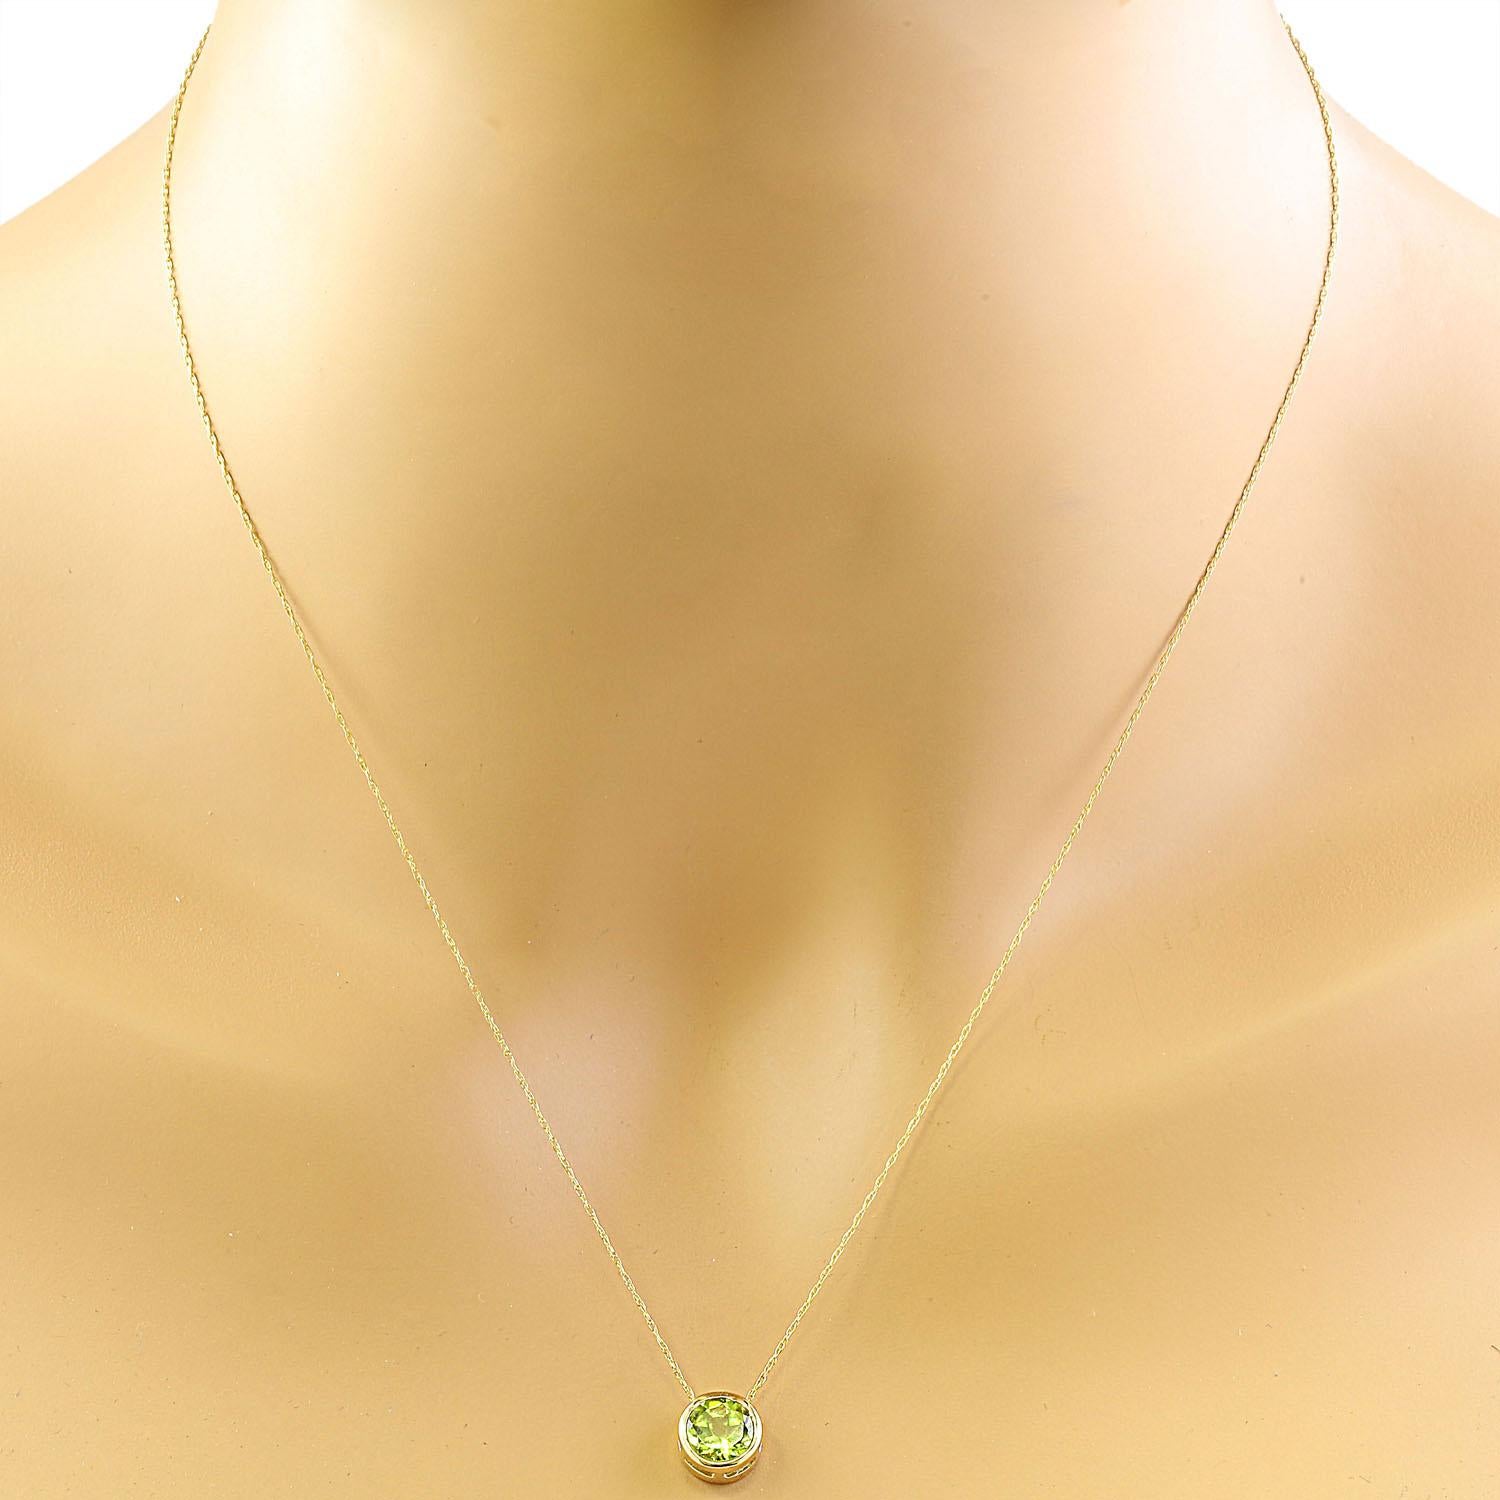 1.50 Carat Peridot 14K Yellow Gold Necklace
Stamped: 14K
Total Necklace Weight: 1.4 Grams
Length: 16 Inches
Peridot Weight: 1.50 Carat (6.50x6.50 Millimeters) 
Face Measures: 8.20x8.20 Millimeters
SKU: [600194]